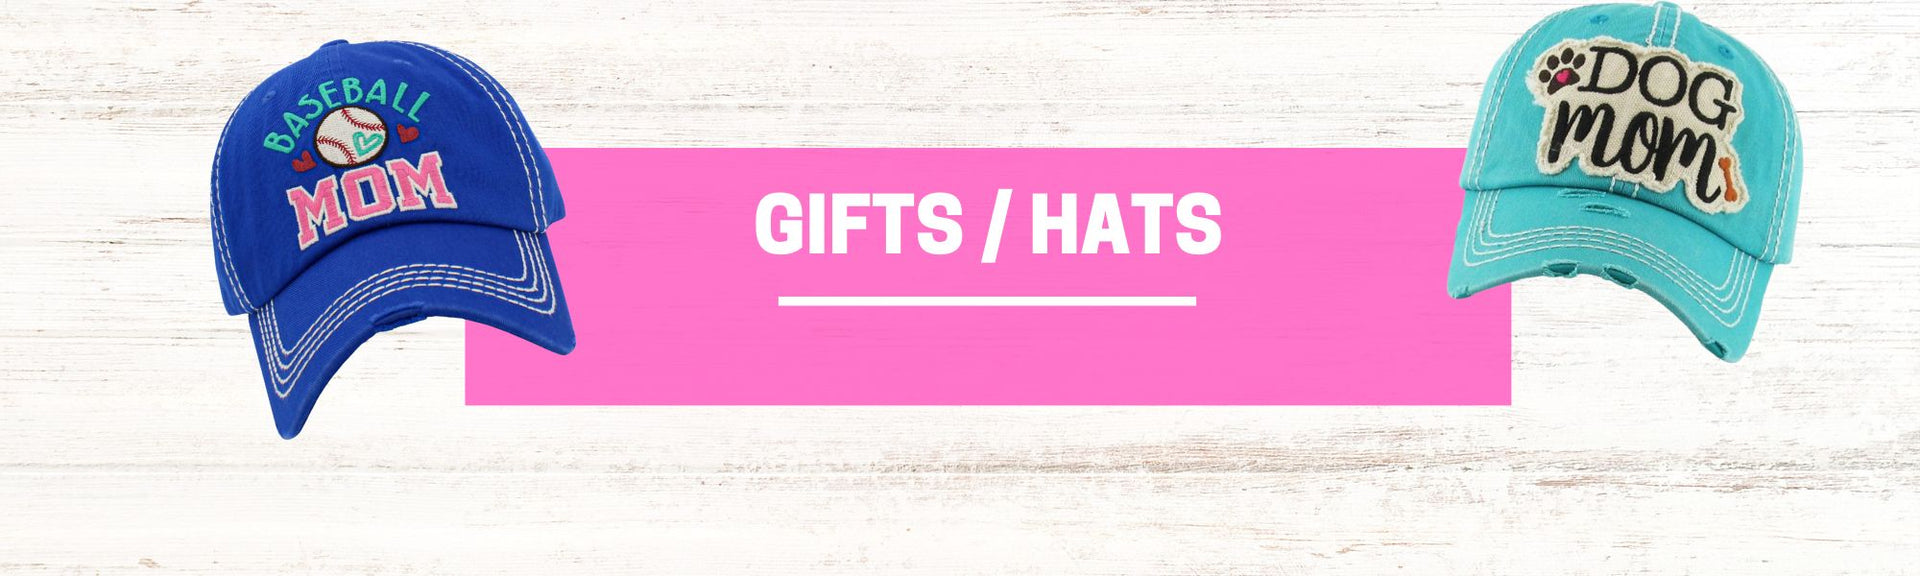 Hats / Gifts